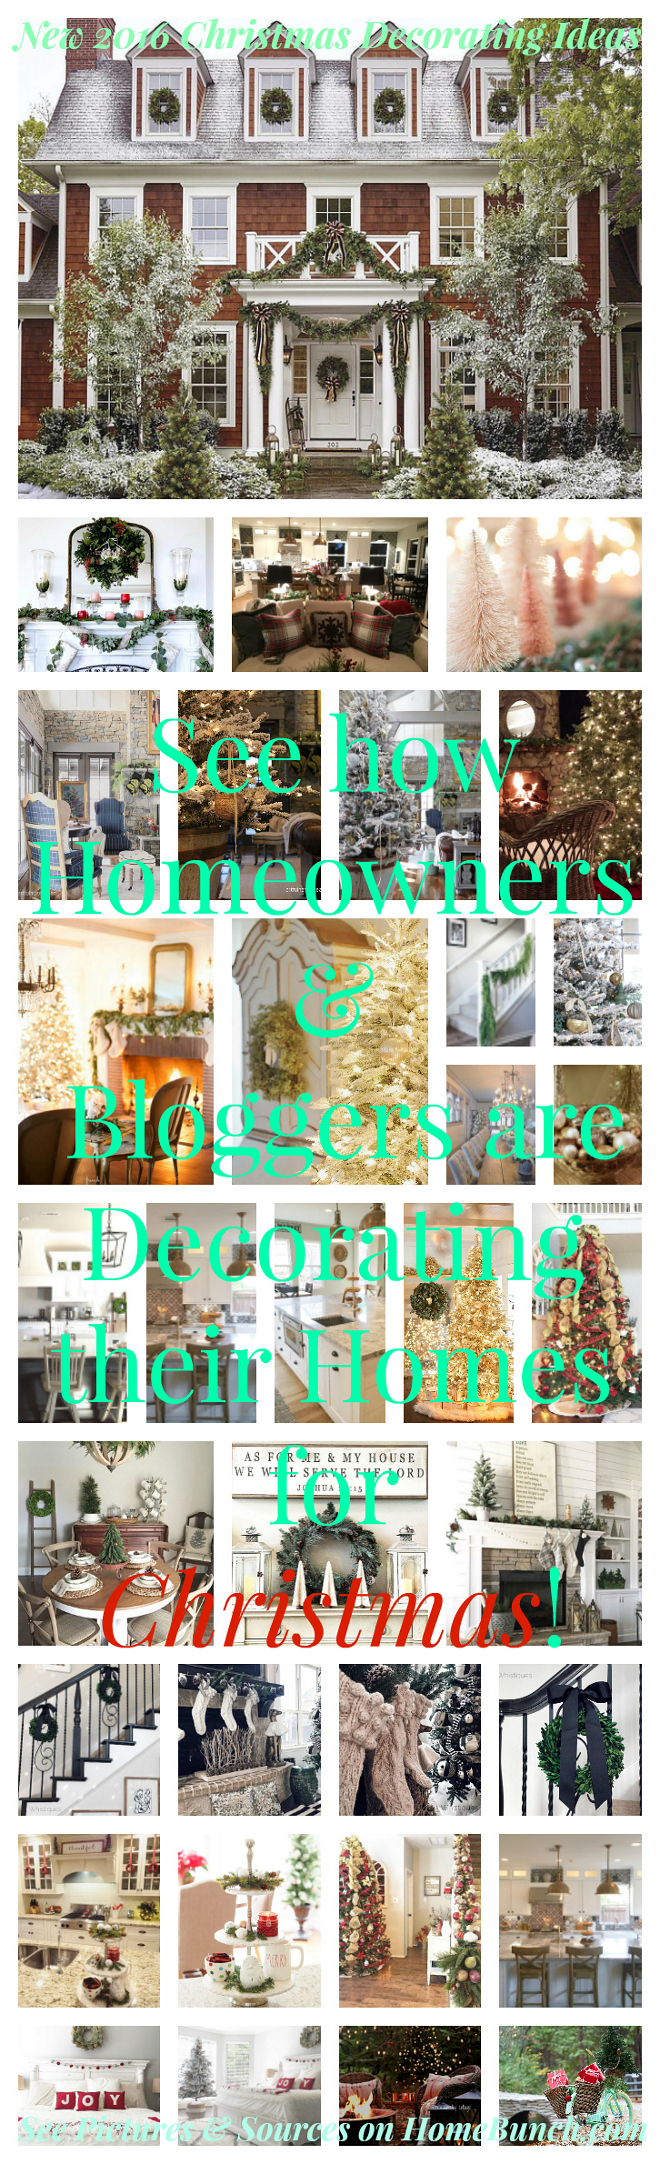 .New 2016 Christmas Decorating Ideas. New 2016 Christmas Decorating Ideas from homeowners, bloggers and from instagram. New 2016 Christmas Decorating Ideas #New2016ChristmasDecoratingIdeas #2016ChristmasDecoratingIdeas #NewChristmasDecoratingIdeas #ChristmasDecoratingIdeas #ChristmasDecoratingIdeas #ChristmasDecor #ChristmasDecorIdeas